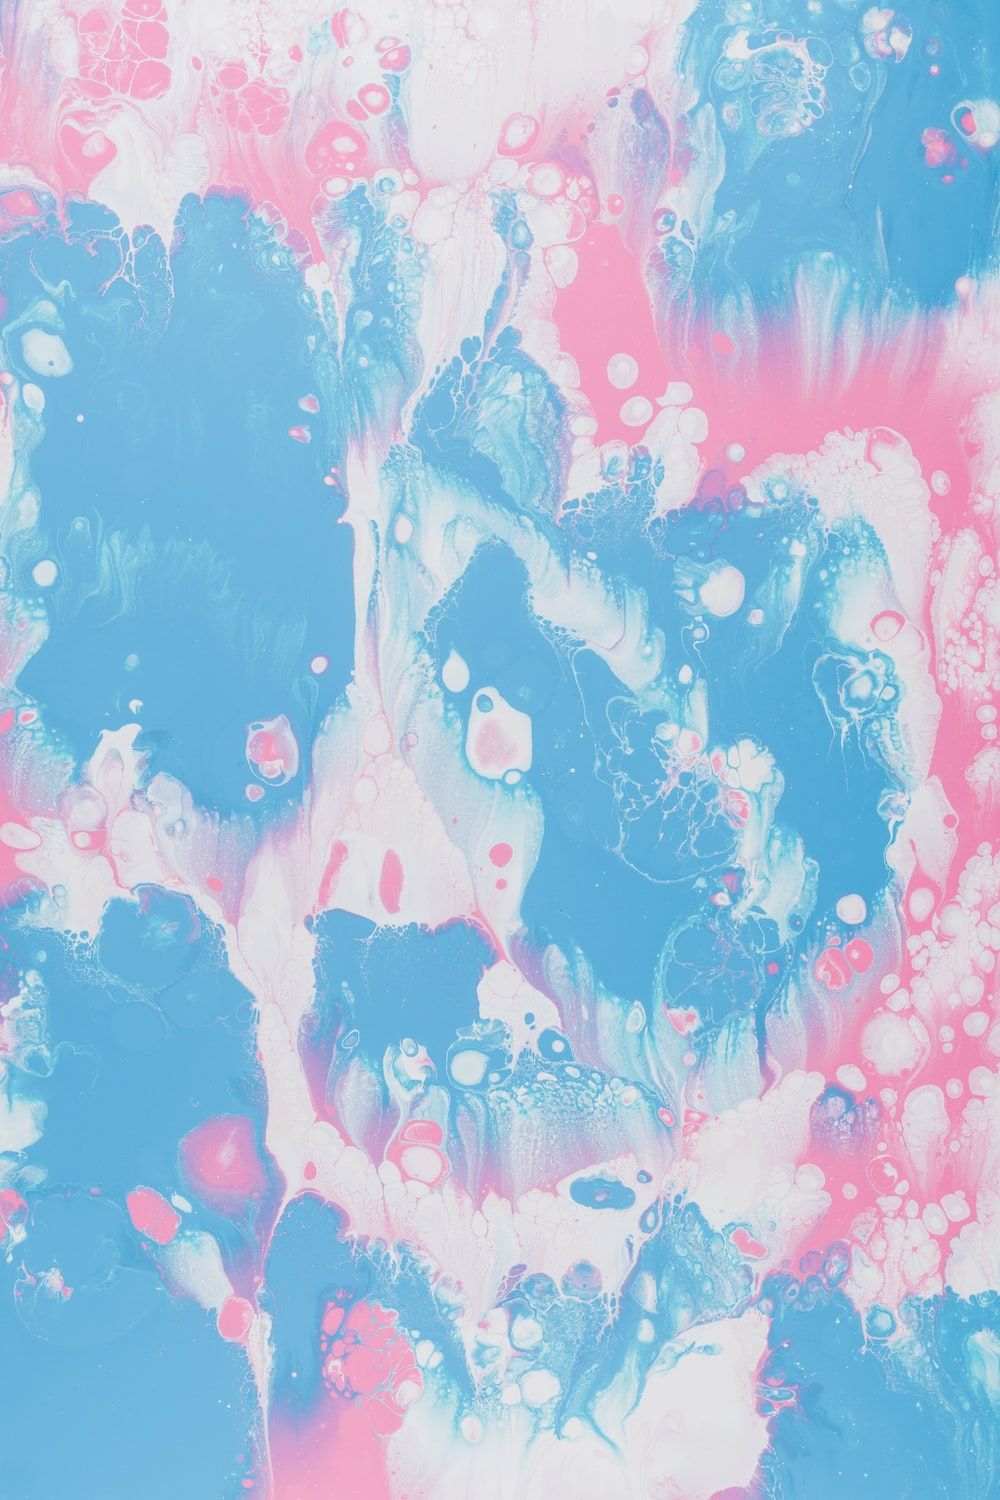 A blue and pink painting with bubbles - Abstract